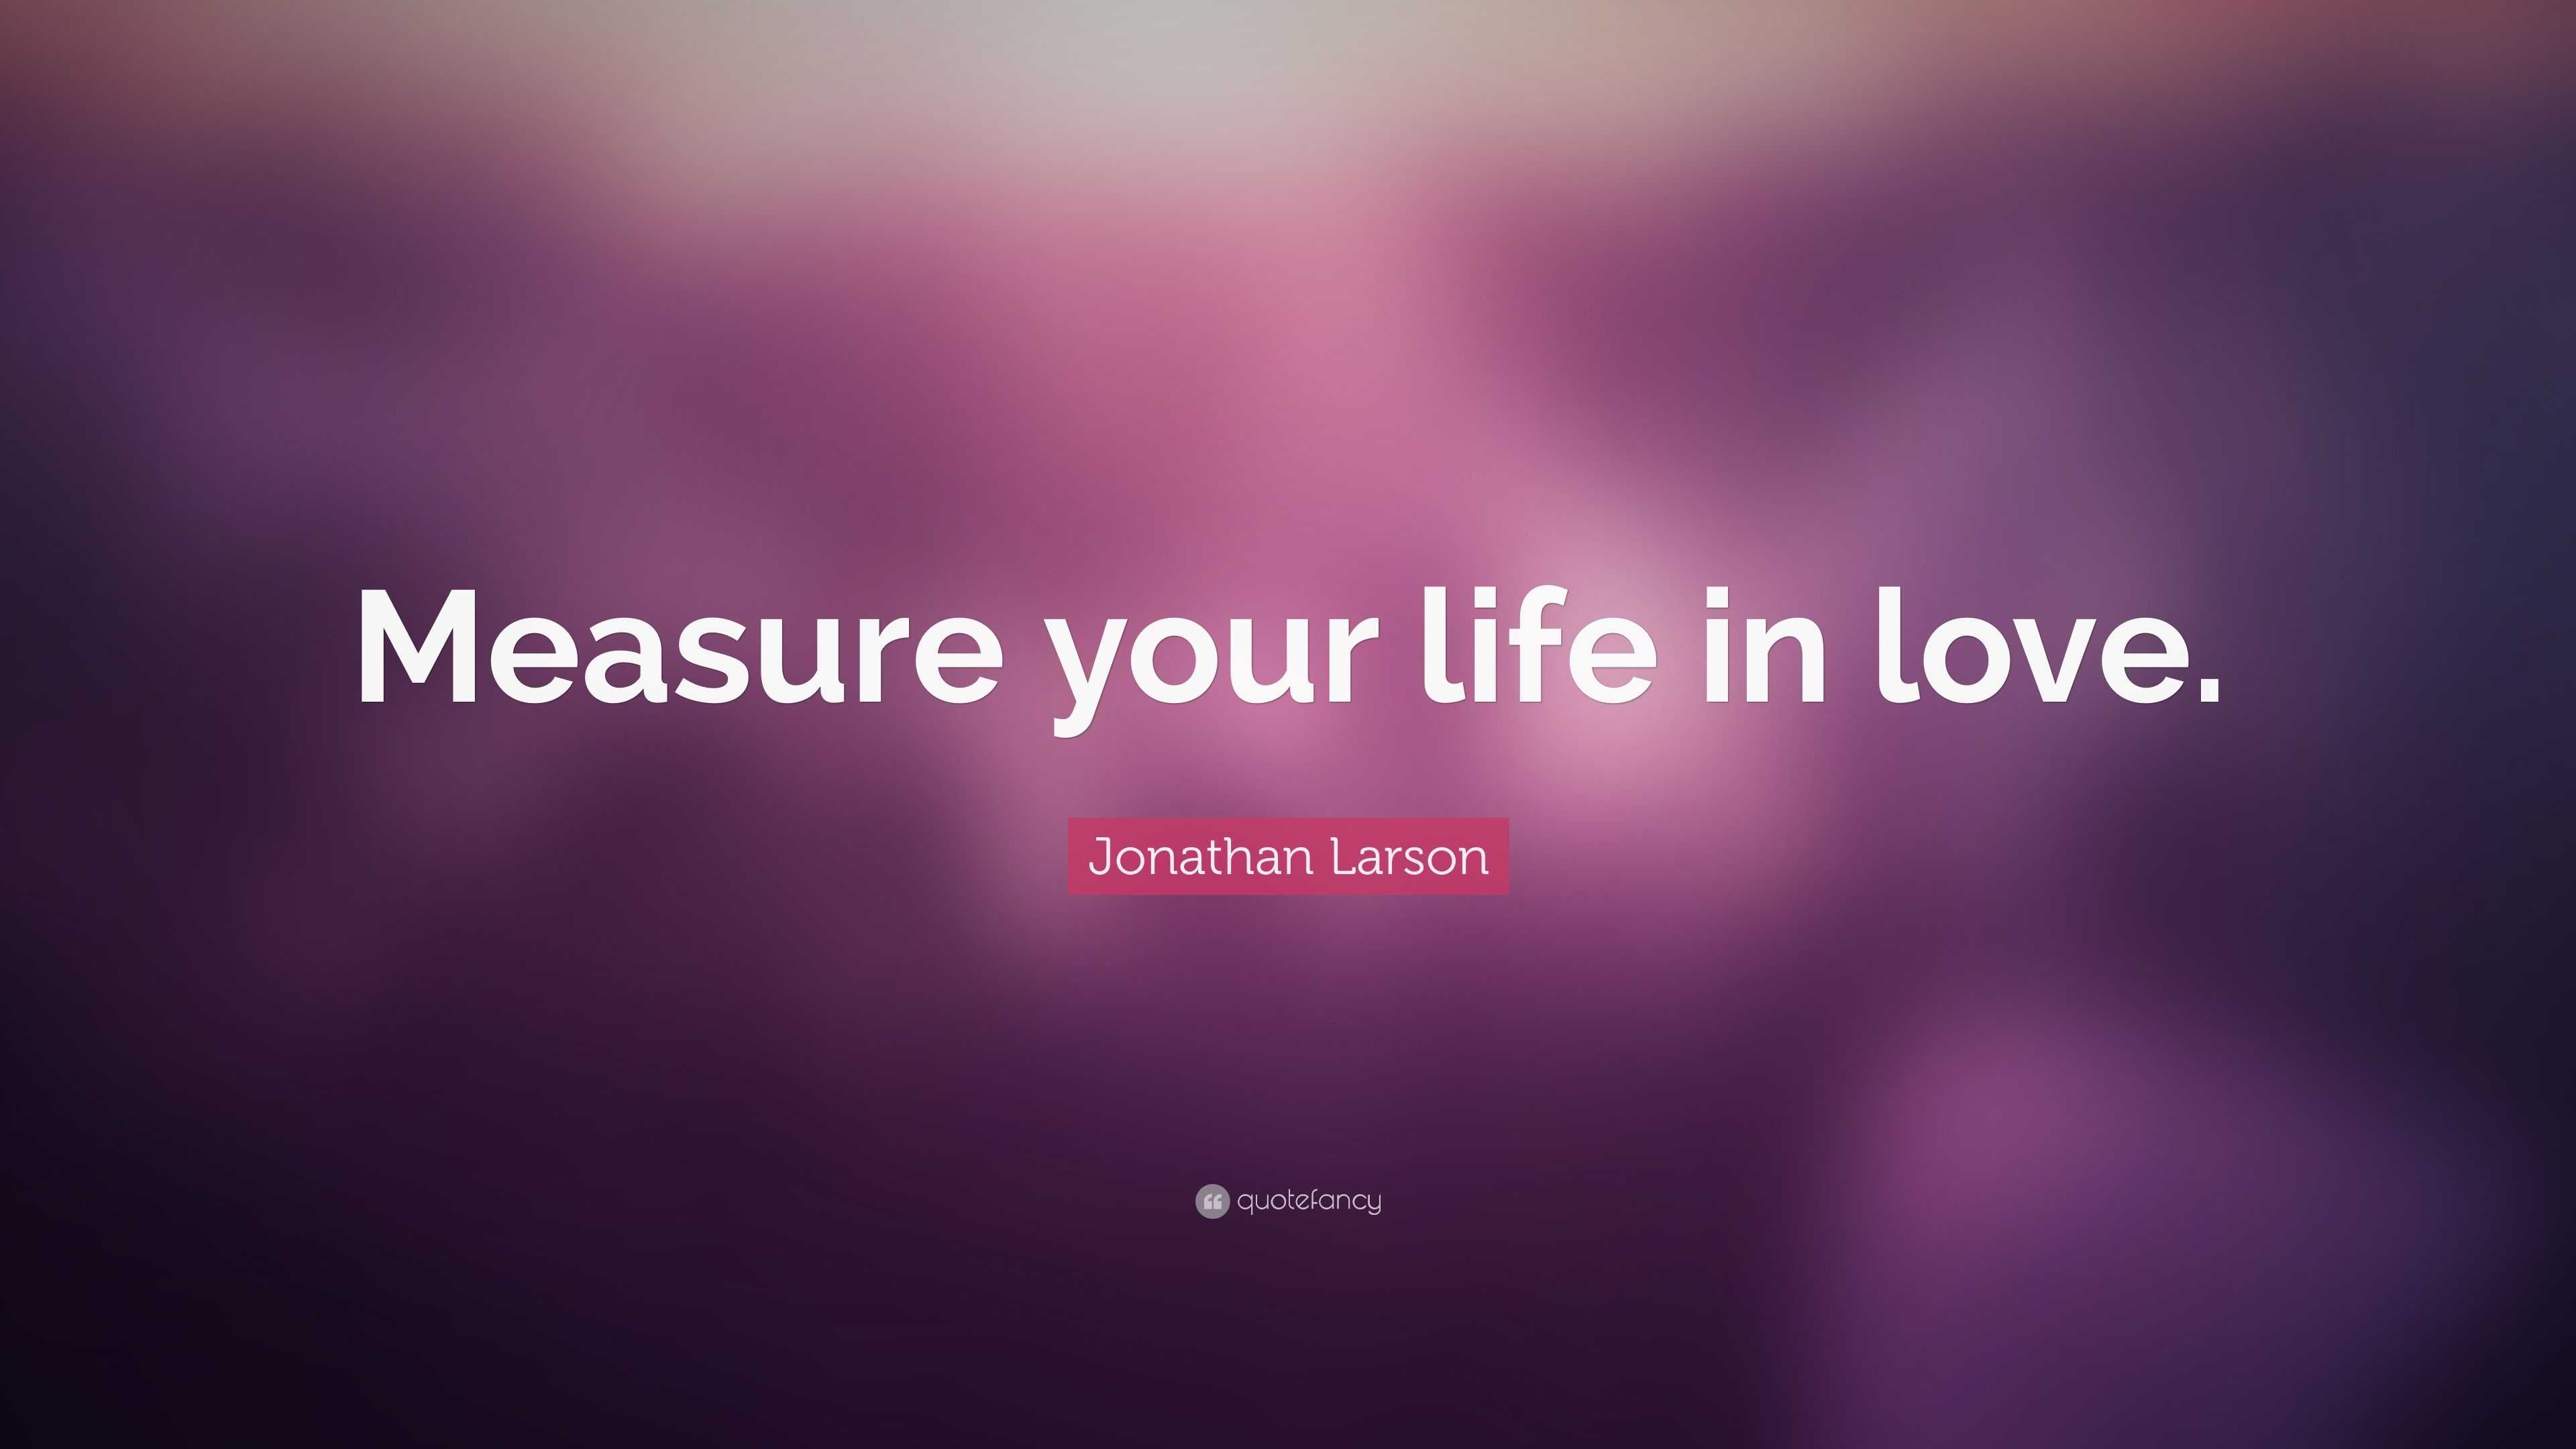 Jonathan Larson Quote: “Measure your life in love.”